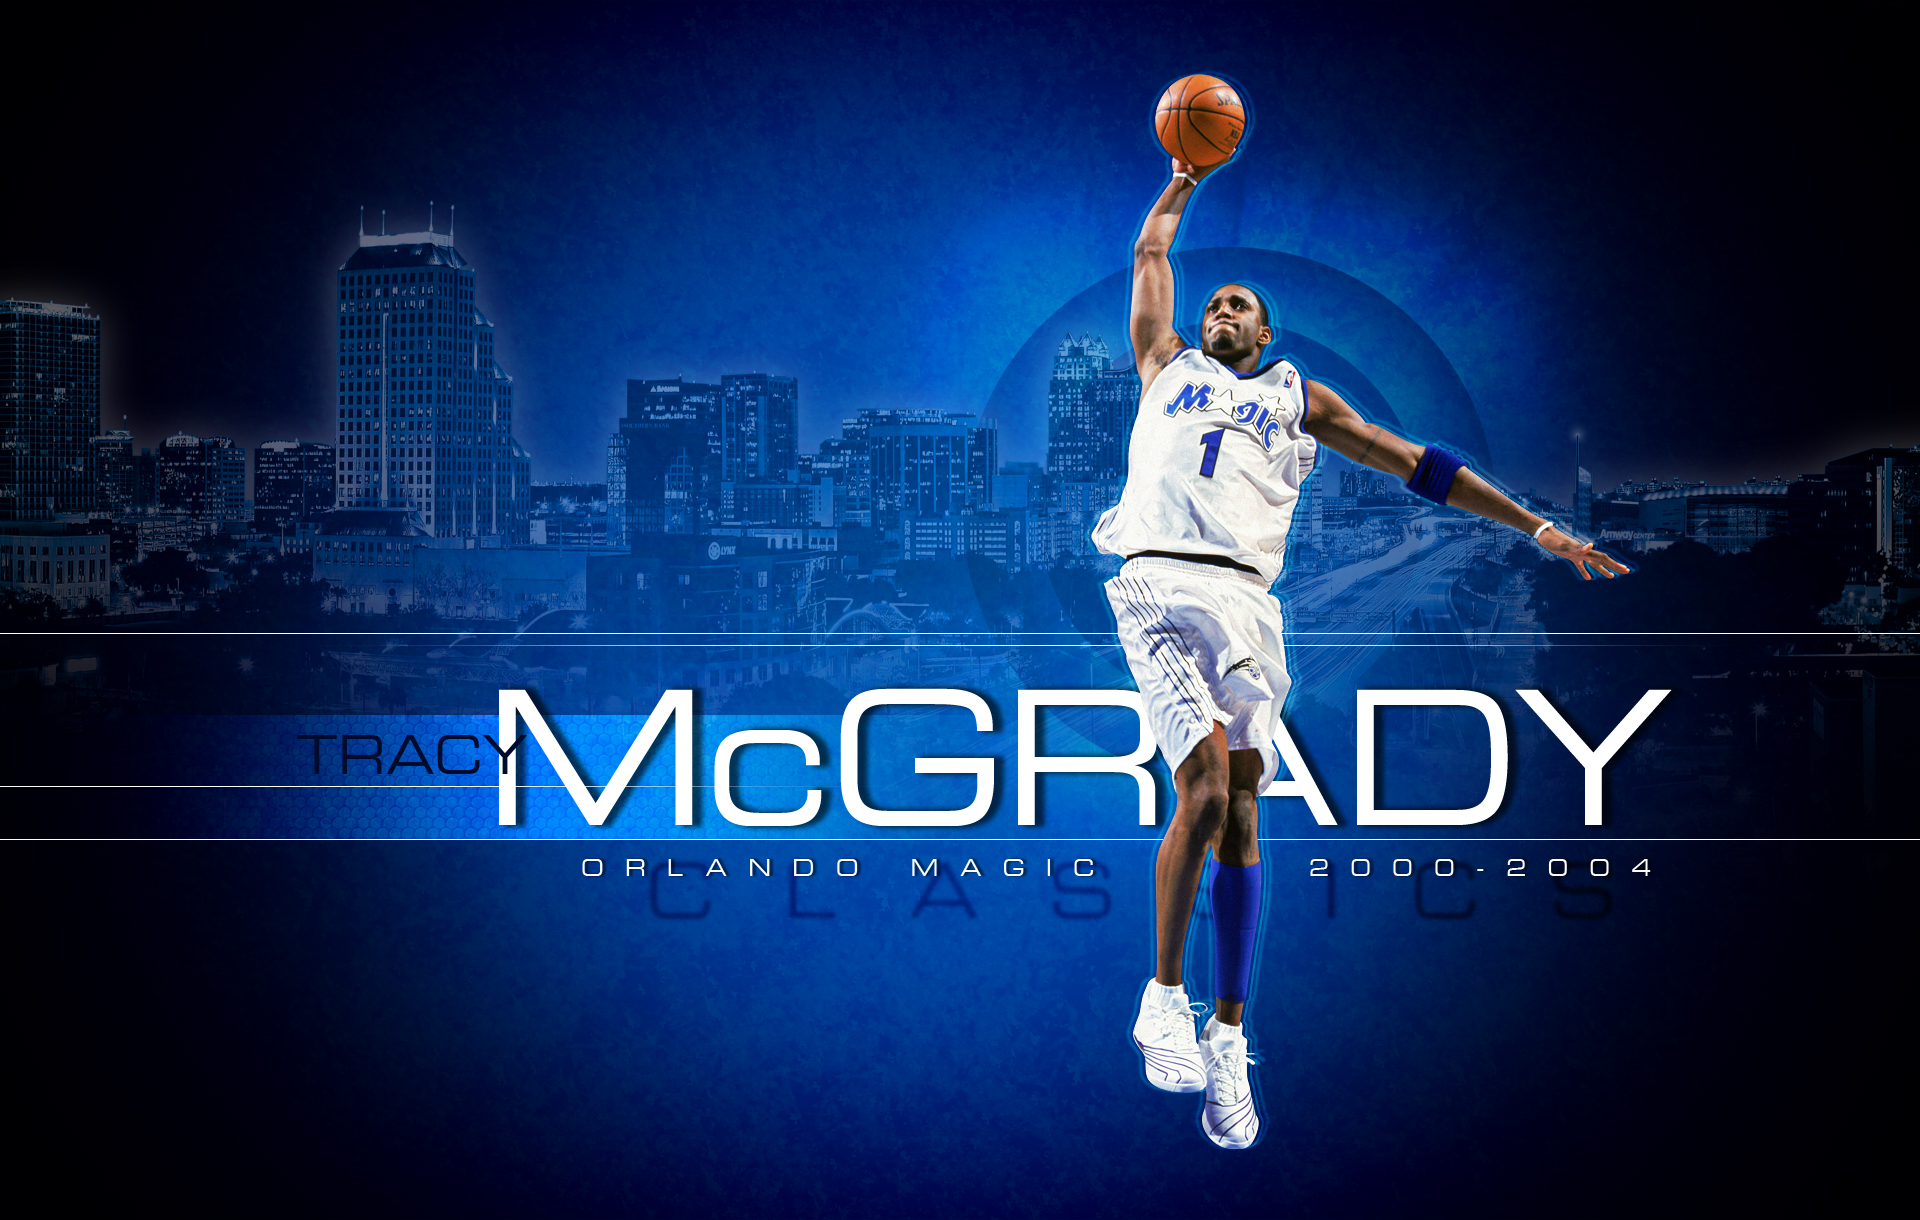 Magic Throwback Wallpaper The Official Site Of